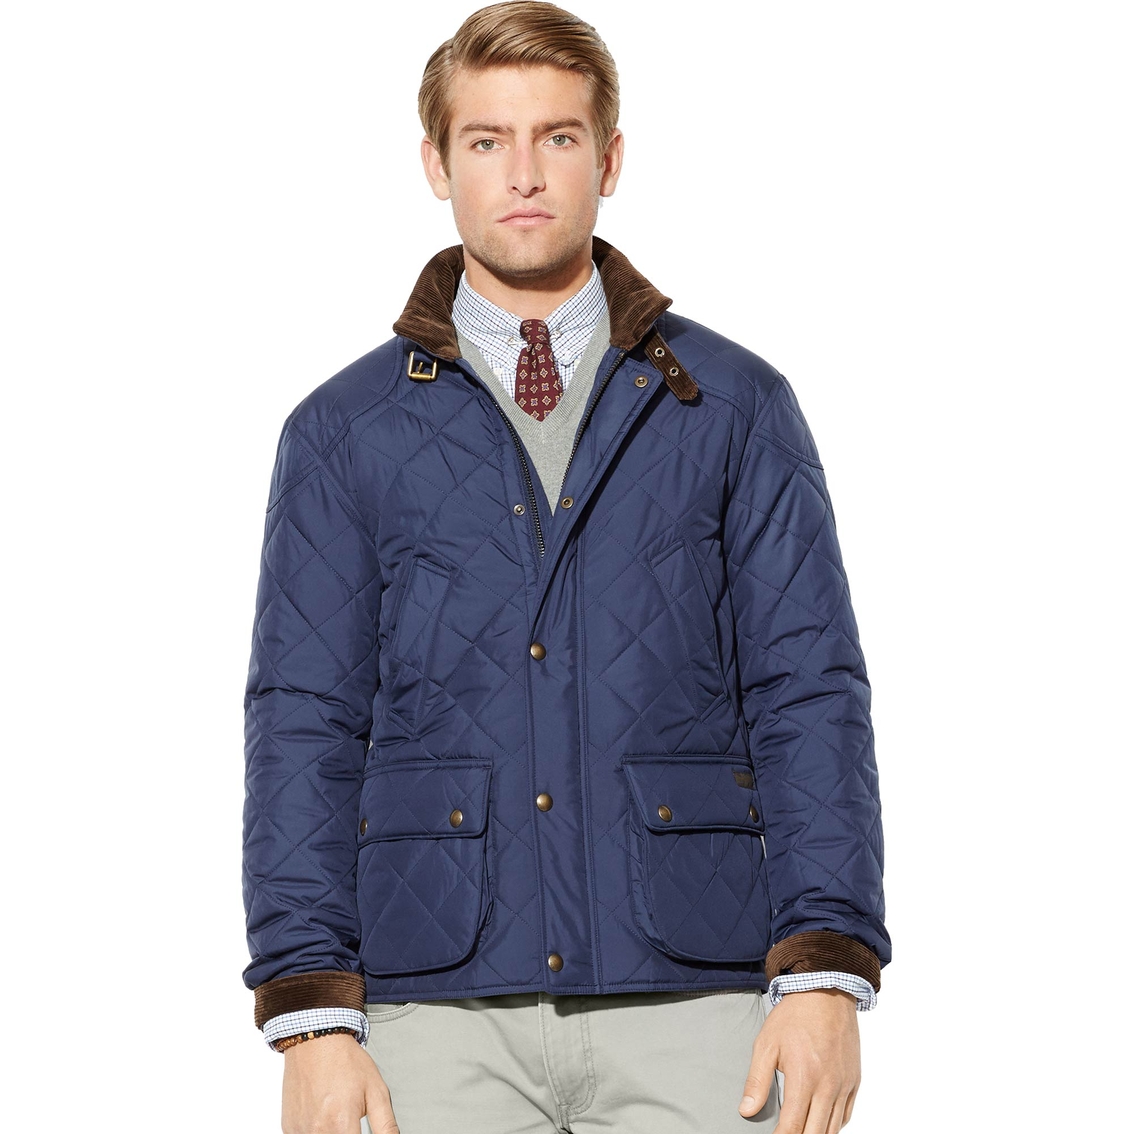 Polo Ralph Lauren Cadwell Quilted Bomber Jacket | Jackets | Clothing ...